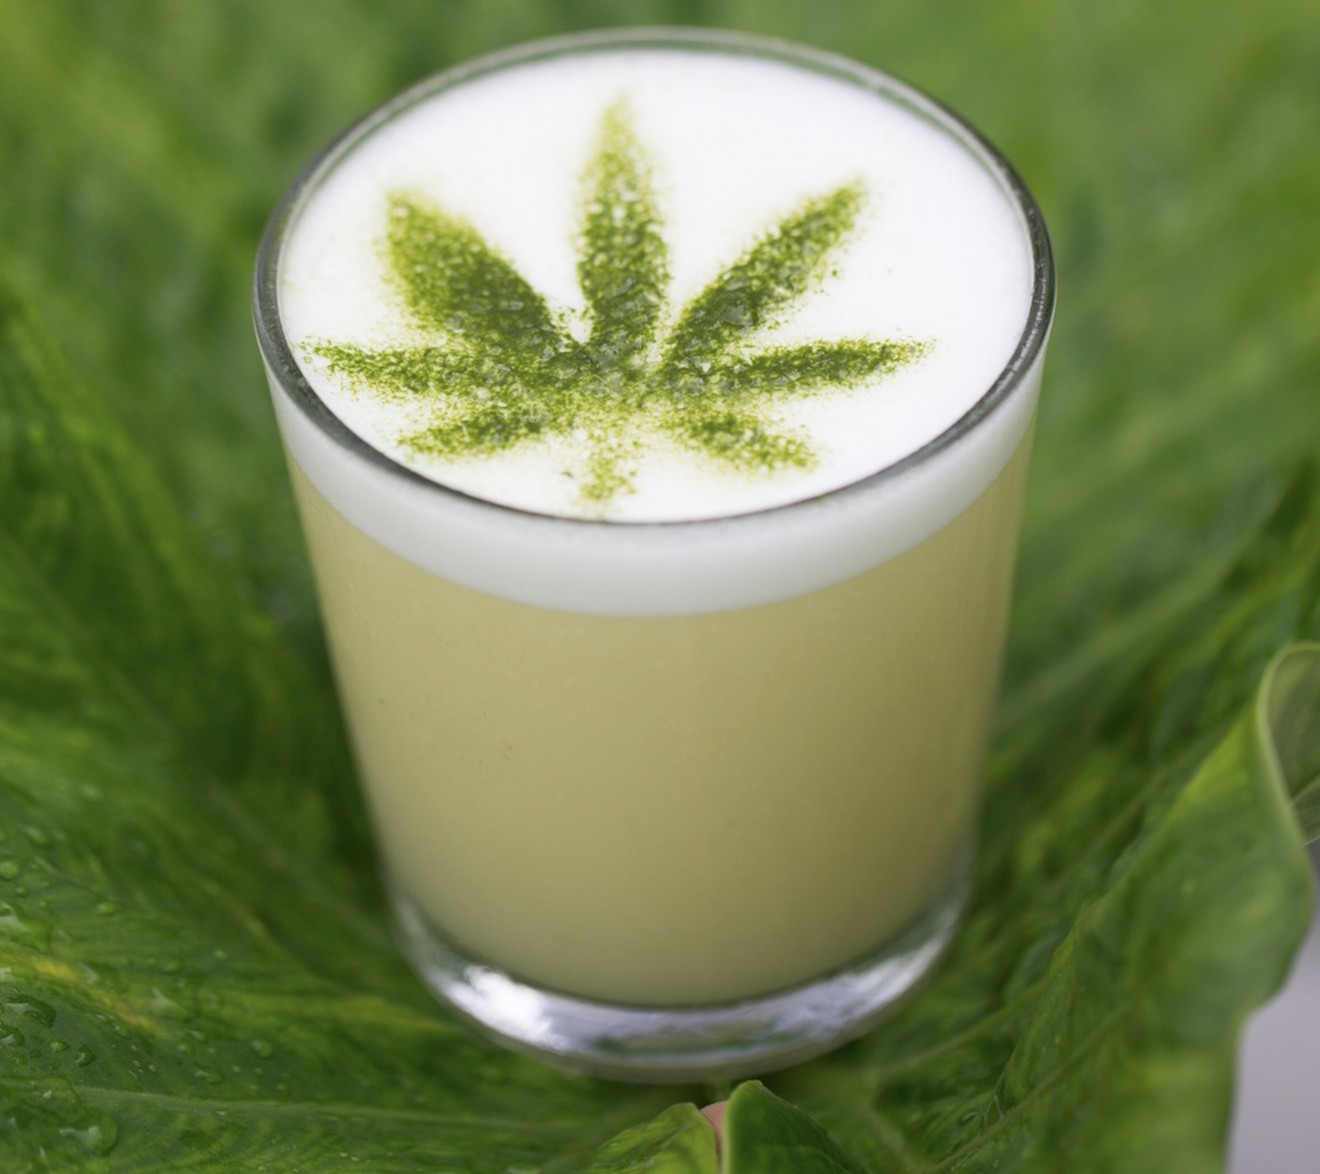 Plant Miami's CBD-infused cocktail is called Plant Medicine.